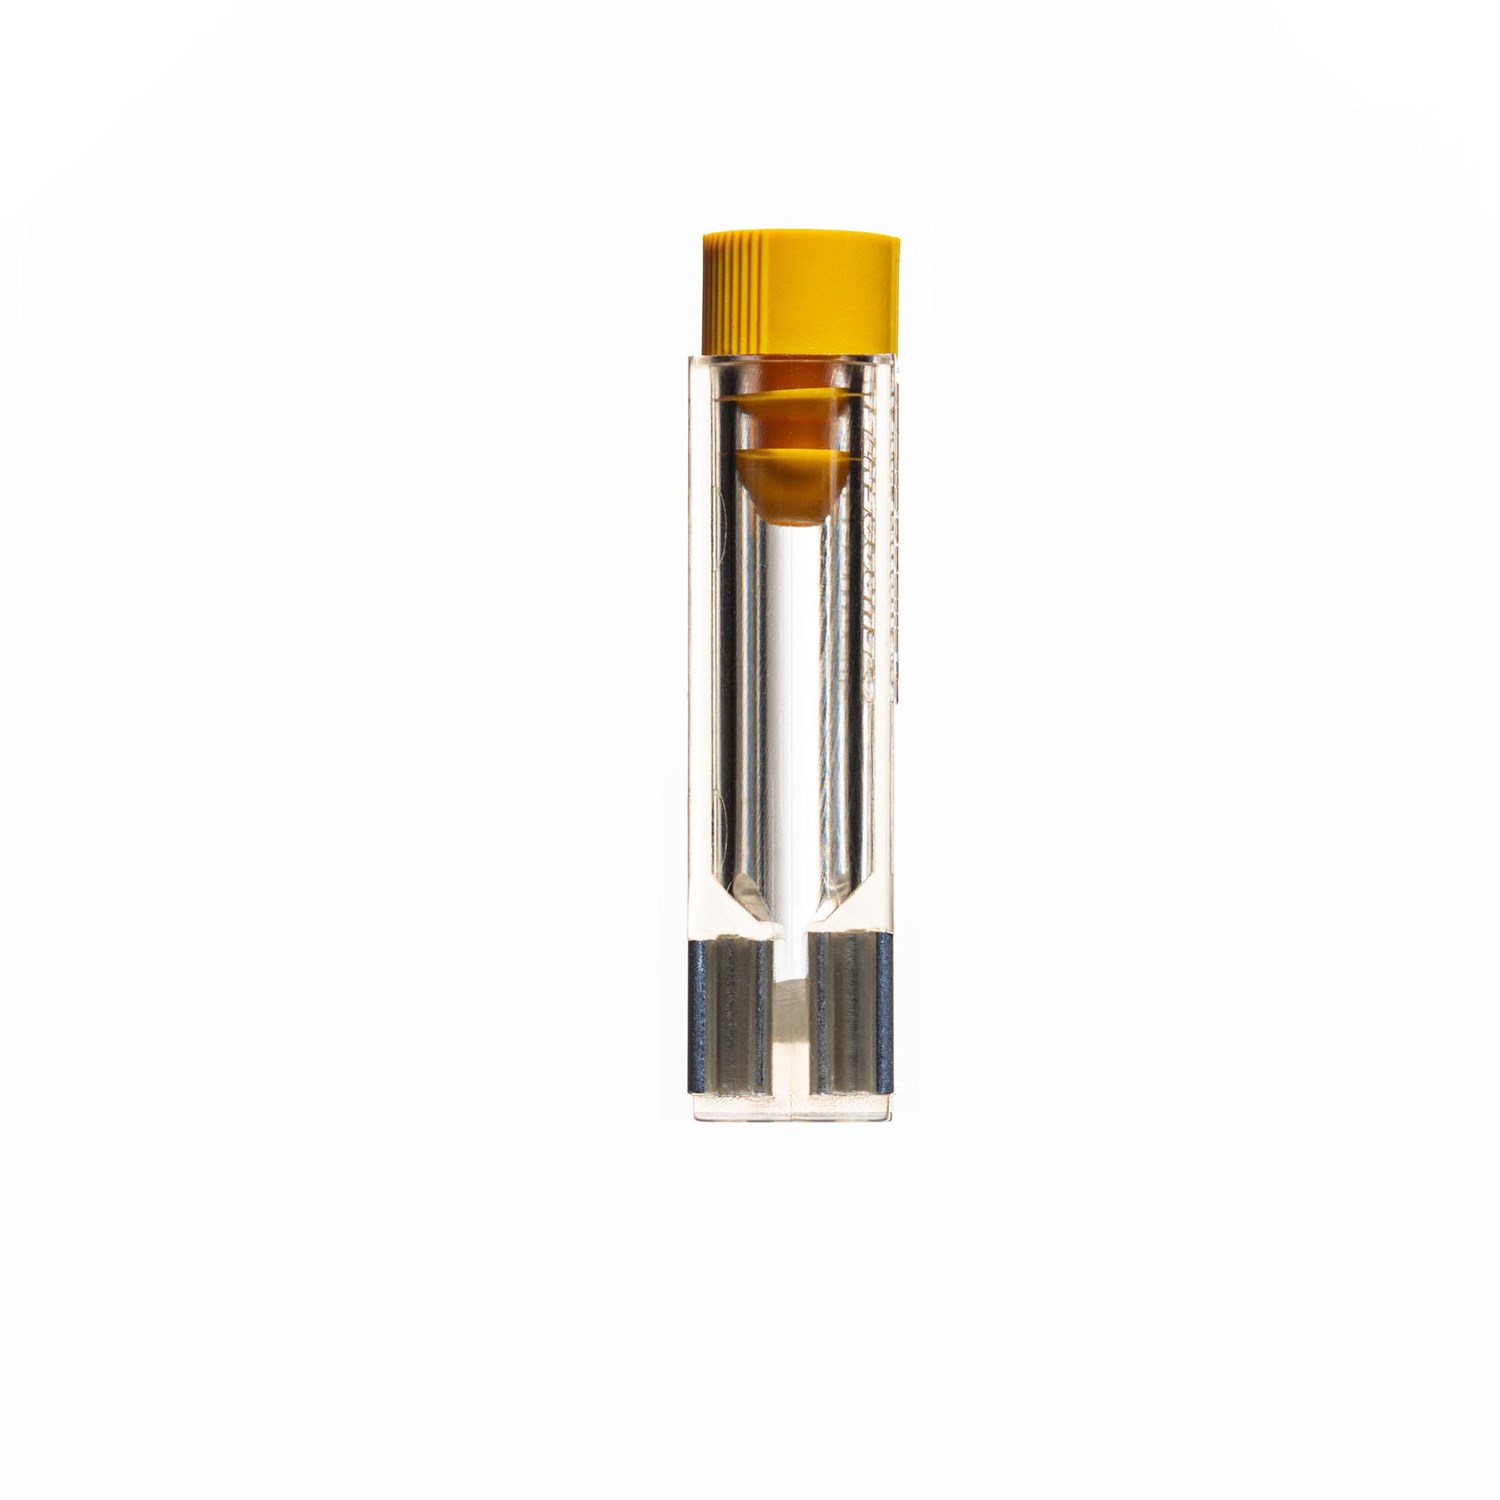 Electroporation Cuvettes 2 Mm Short Yellow Cap Bridge cuvettes meet and exceed every measurable qualification and parameter. electroporation cuvettes 2 mm short yellow cap